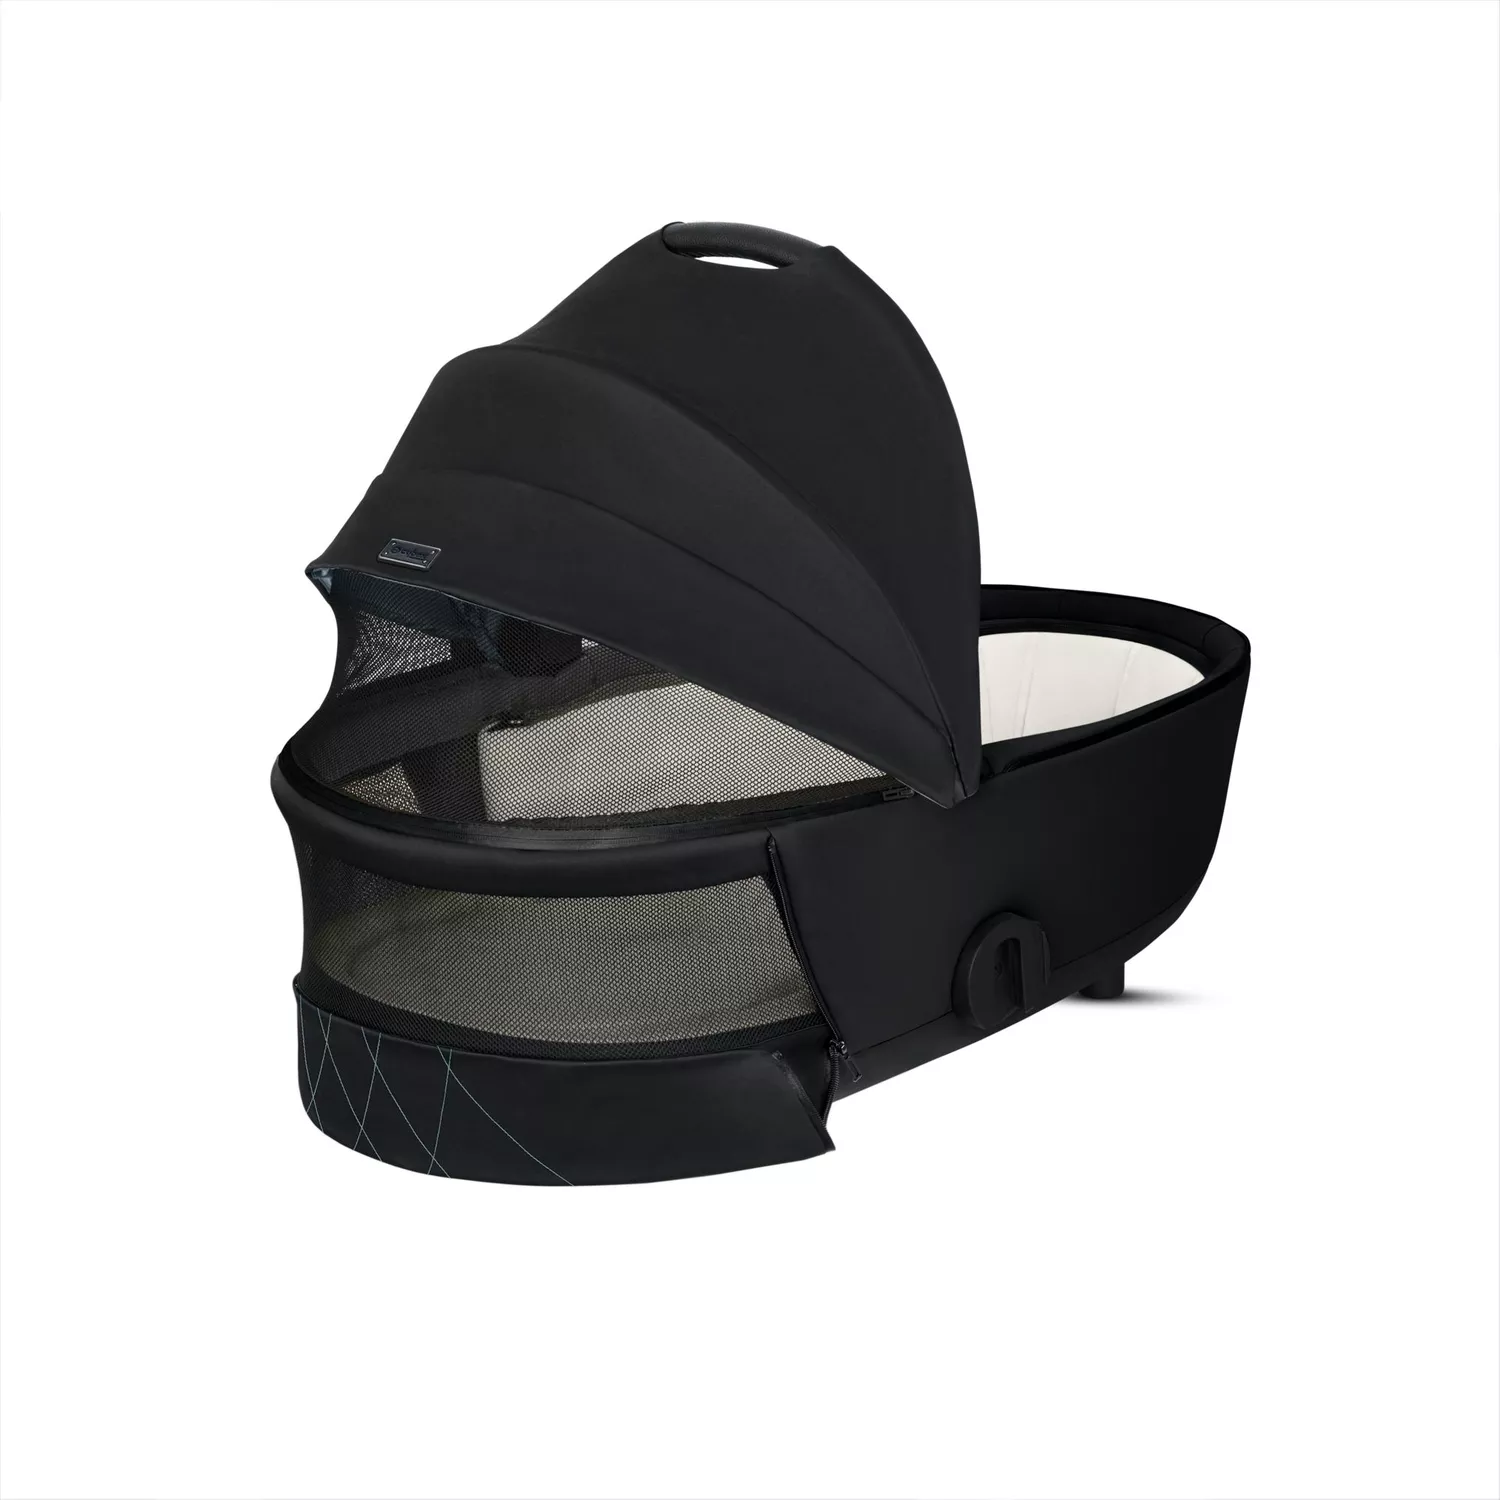 Cybex Mios Lux Carry Cot